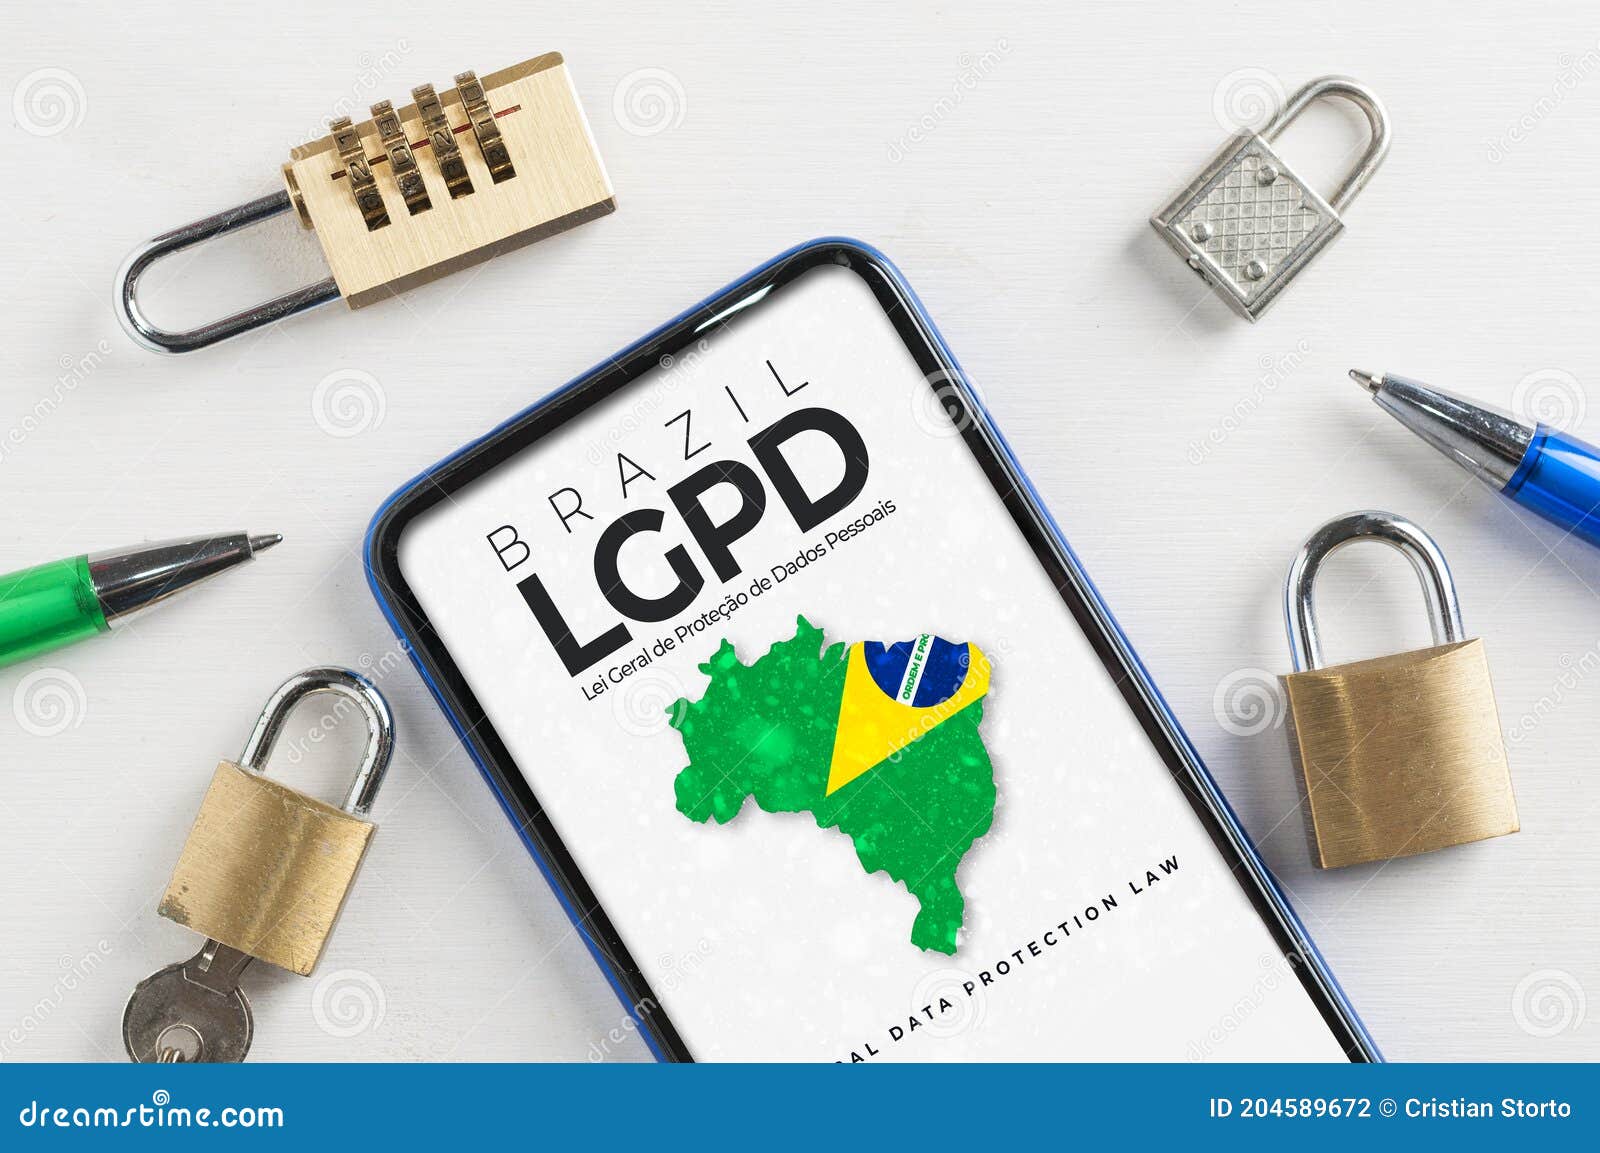 lgpd brazilian data protection law concept: smartphone sorrounded by padlocks with an imaginary page showing a link to read the